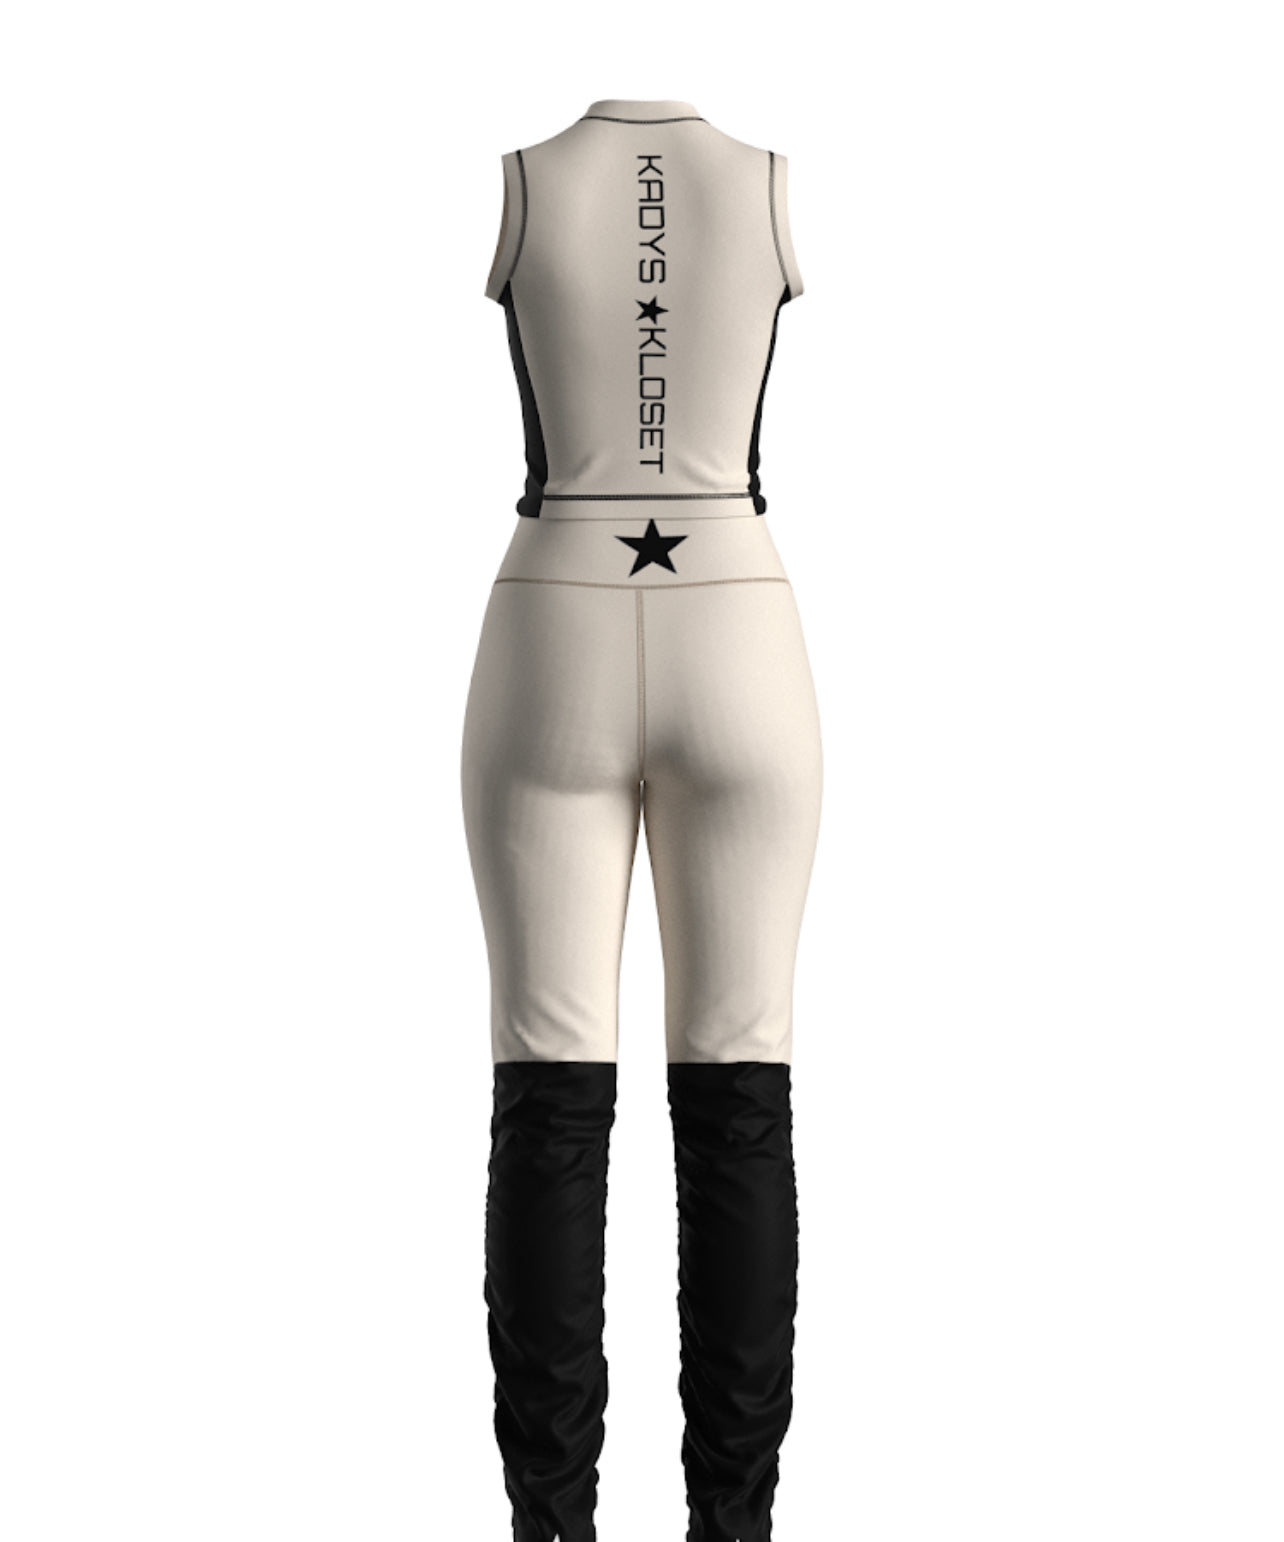 Goddess set with our elongated tights, featuring a leg warmer-like style. Effortlessly chic!